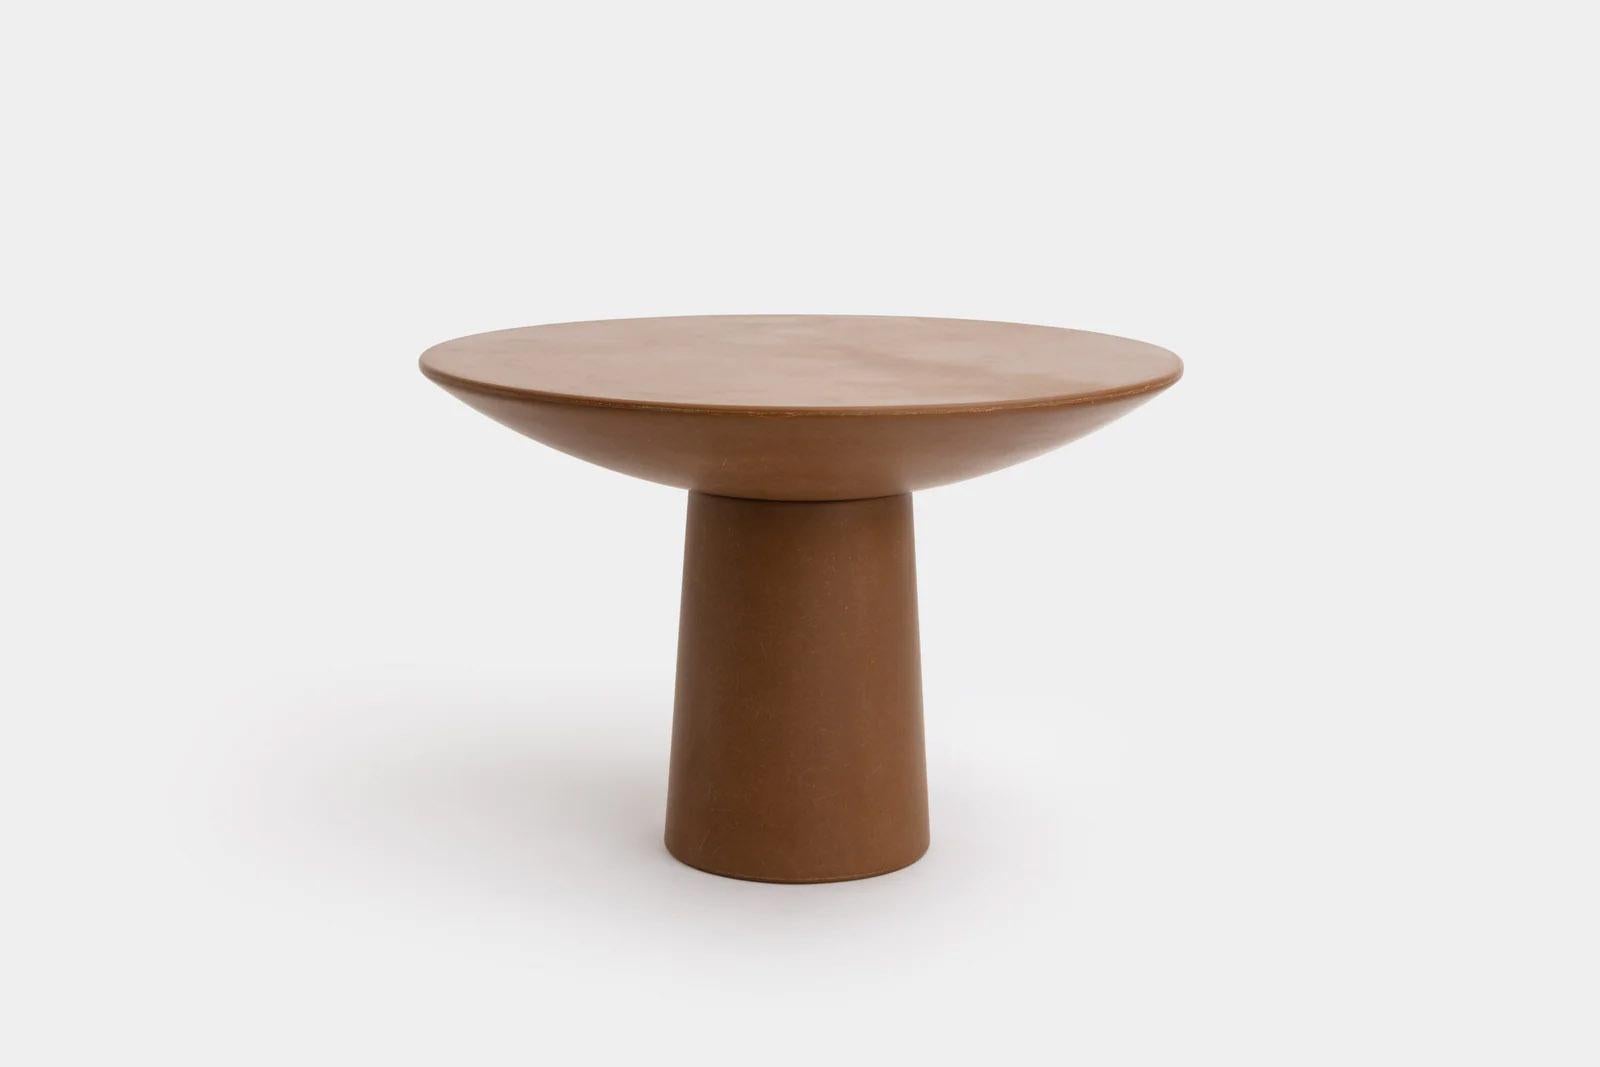 Contemporary fiberglass dining table - Roly Poly small dining table by Faye Toogood. This is shown in the chestnut fiberglass finish. 
Design: Faye Toogood
Material: Fiberglass.  
Available also in Chestnut Raw, Raw,
Charcoal, Charcoal Raw,